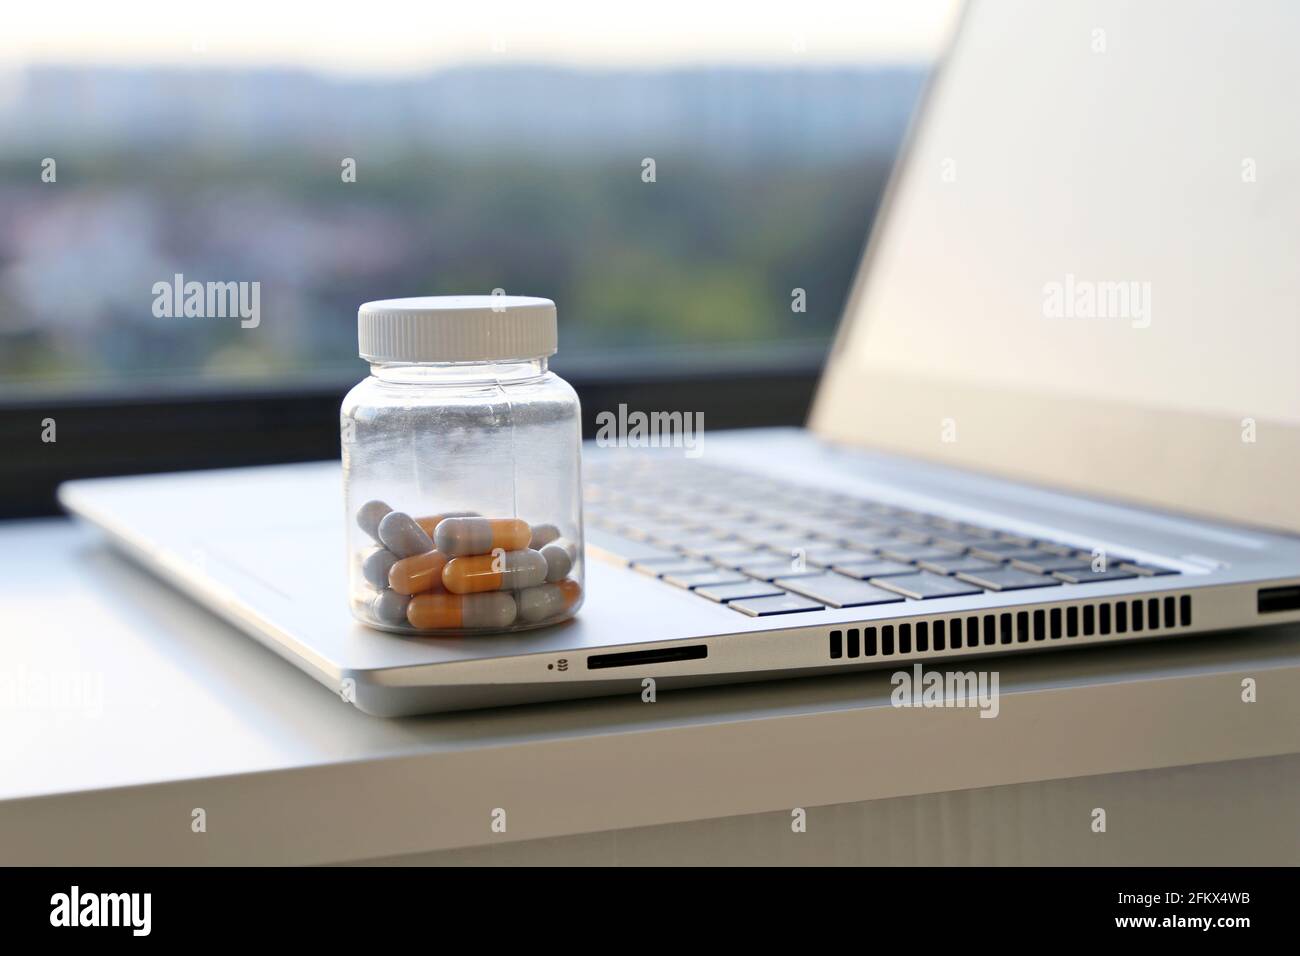 Pills on laptop keyboard on window background, capsules in a bottle. Concept of taking medication in office, vitamins for energy and work Stock Photo